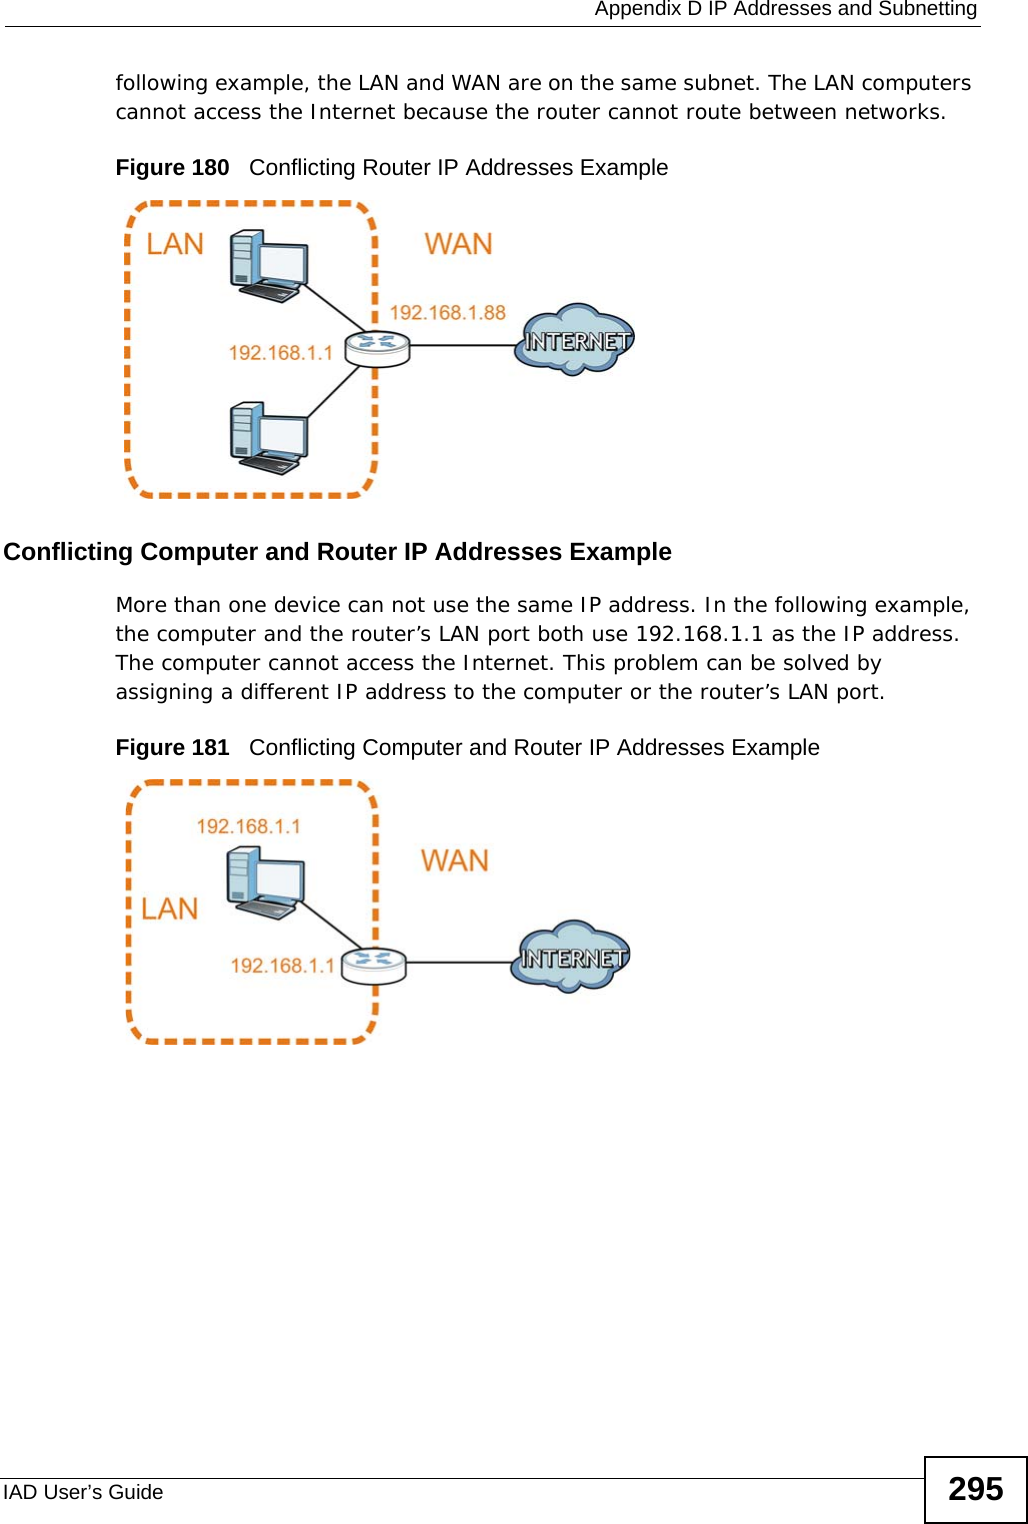  Appendix D IP Addresses and SubnettingIAD User’s Guide 295following example, the LAN and WAN are on the same subnet. The LAN computers cannot access the Internet because the router cannot route between networks.Figure 180   Conflicting Router IP Addresses ExampleConflicting Computer and Router IP Addresses ExampleMore than one device can not use the same IP address. In the following example, the computer and the router’s LAN port both use 192.168.1.1 as the IP address. The computer cannot access the Internet. This problem can be solved by assigning a different IP address to the computer or the router’s LAN port.  Figure 181   Conflicting Computer and Router IP Addresses Example